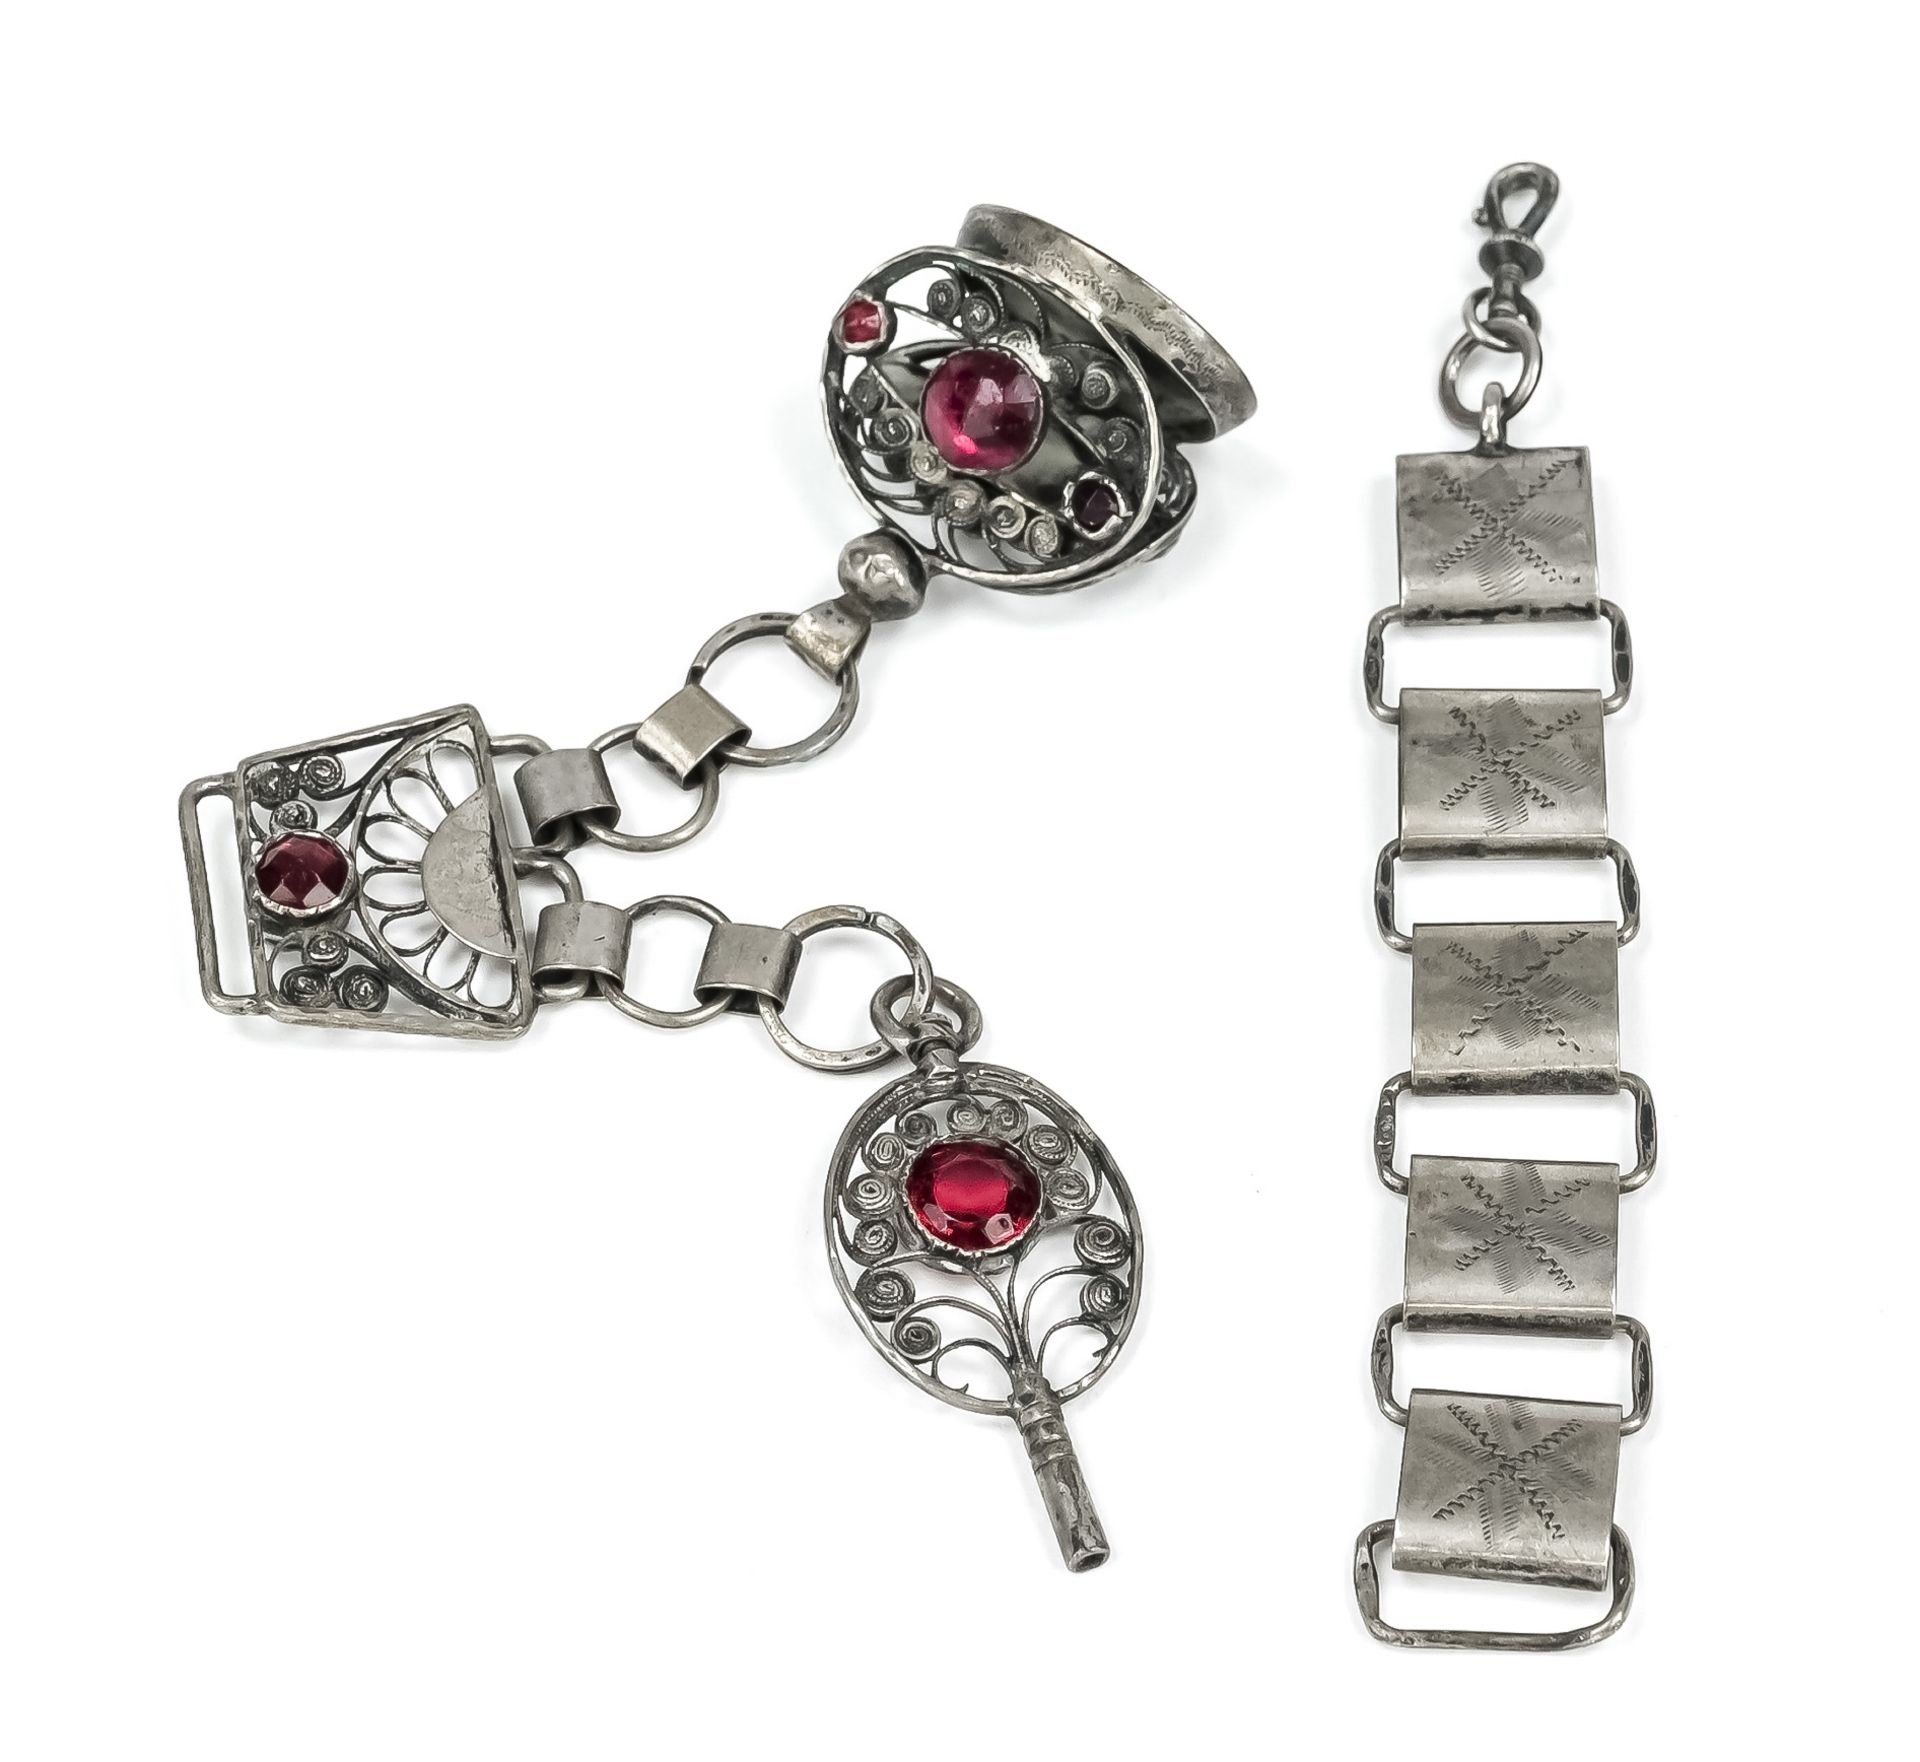 Chatelain silver, 19th century, with red stones and engravings, pocket watch key and non-engraved